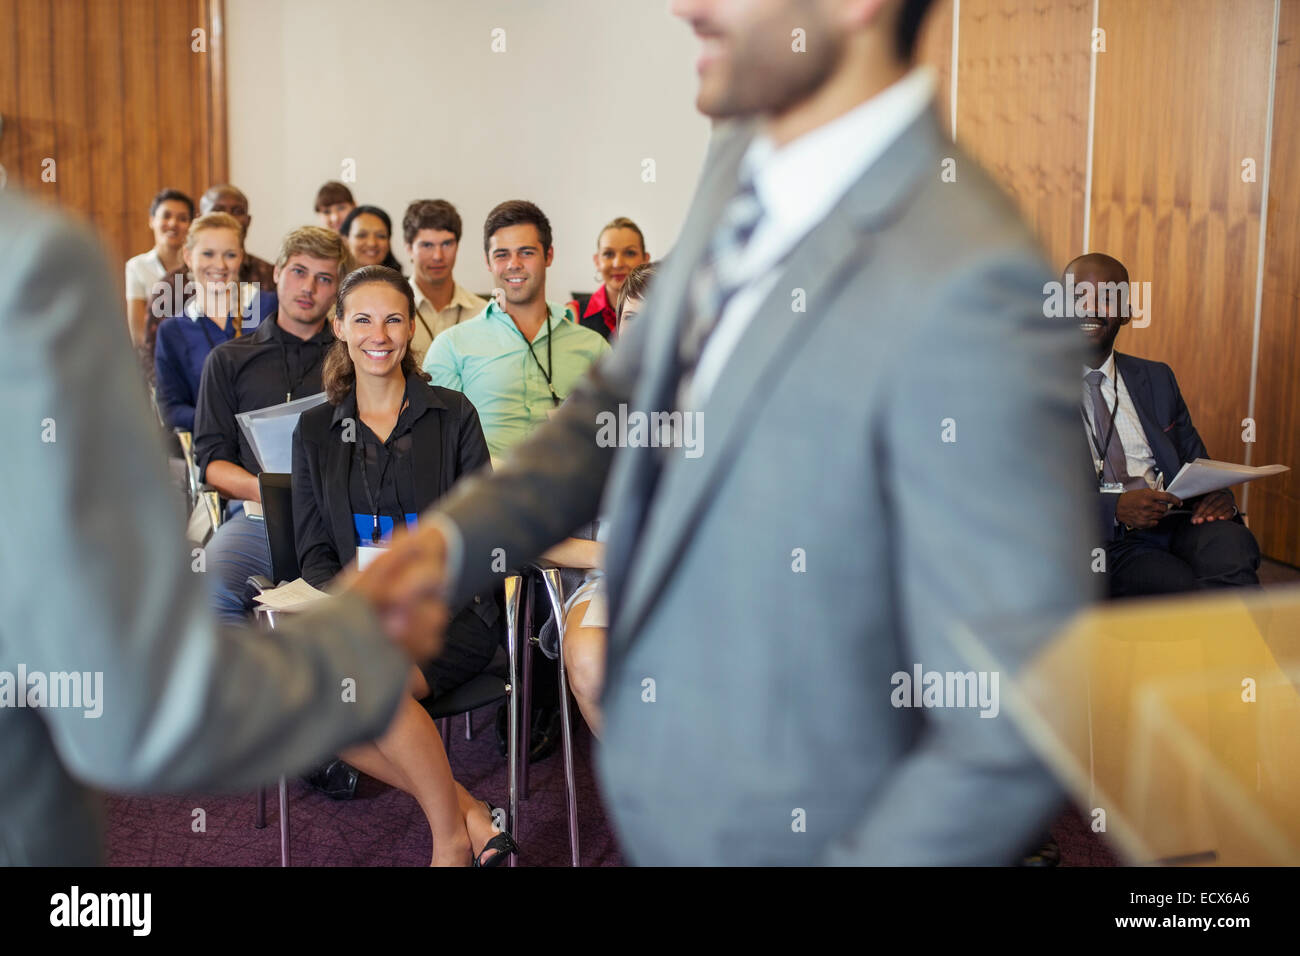 Two businessmen shaking hands during conference in conference room Stock Photo